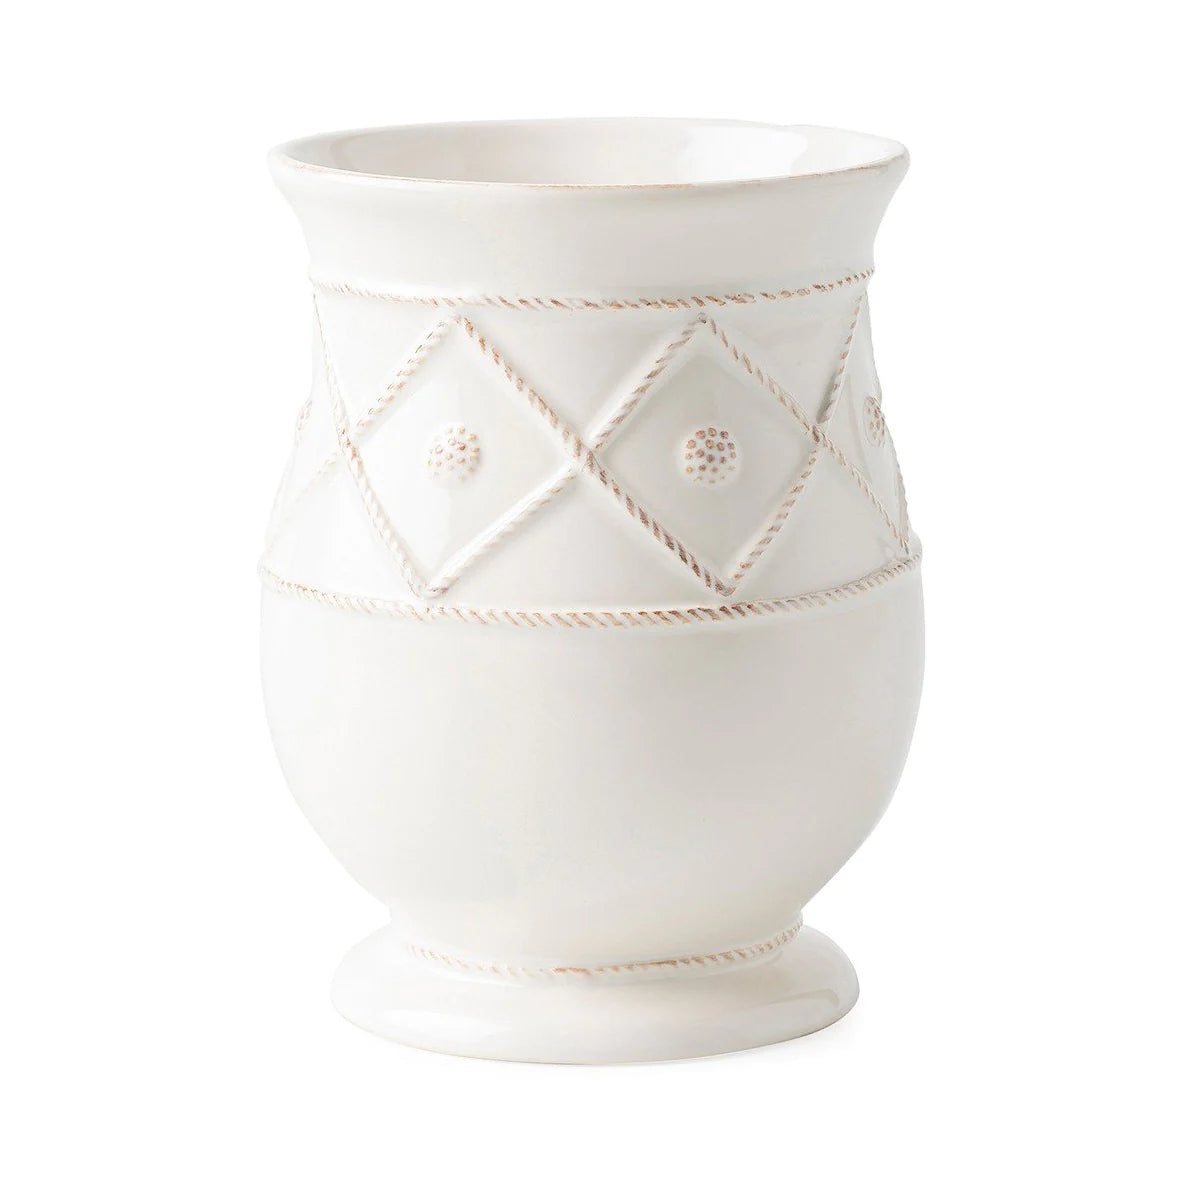 Wallace-Hester Wedding Registry Items